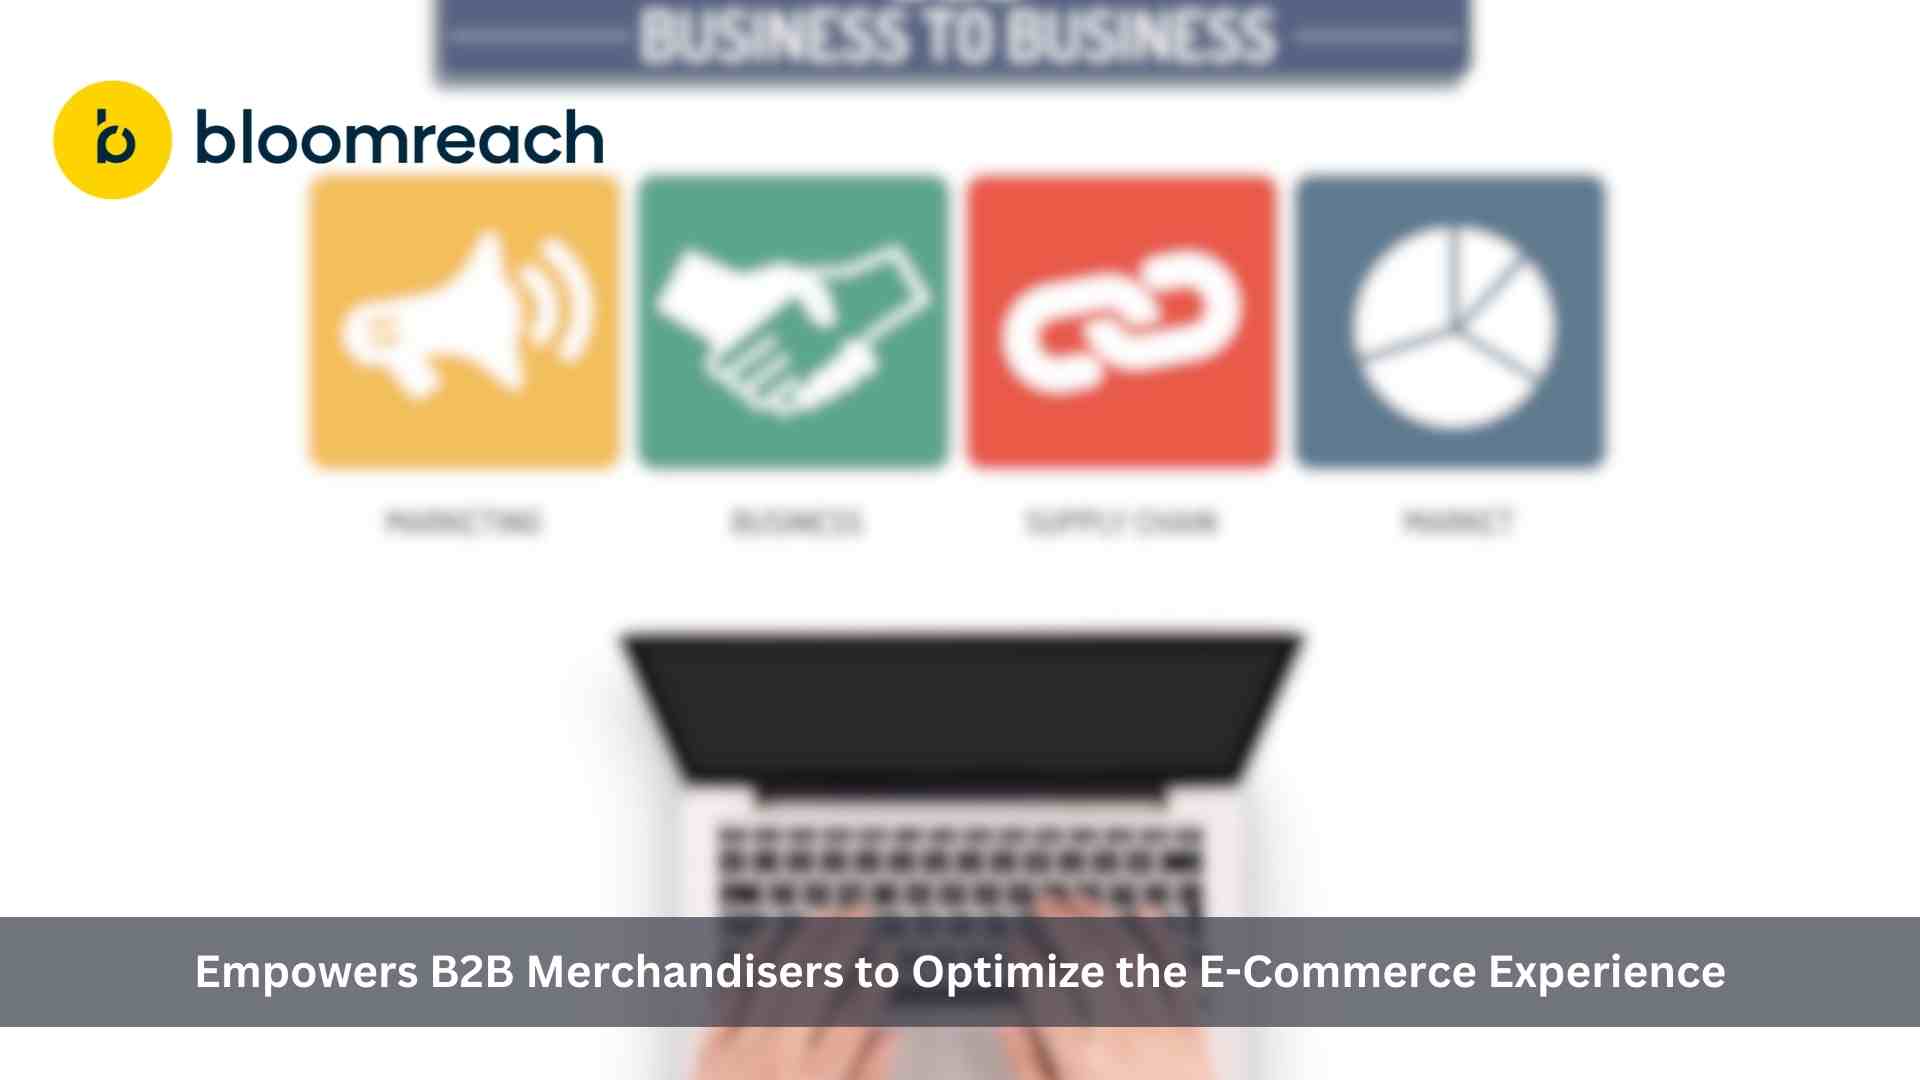 Bloomreach Empowers B2B Merchandisers to Optimize the E-Commerce Experience With the Launch of New Features and Enhancements